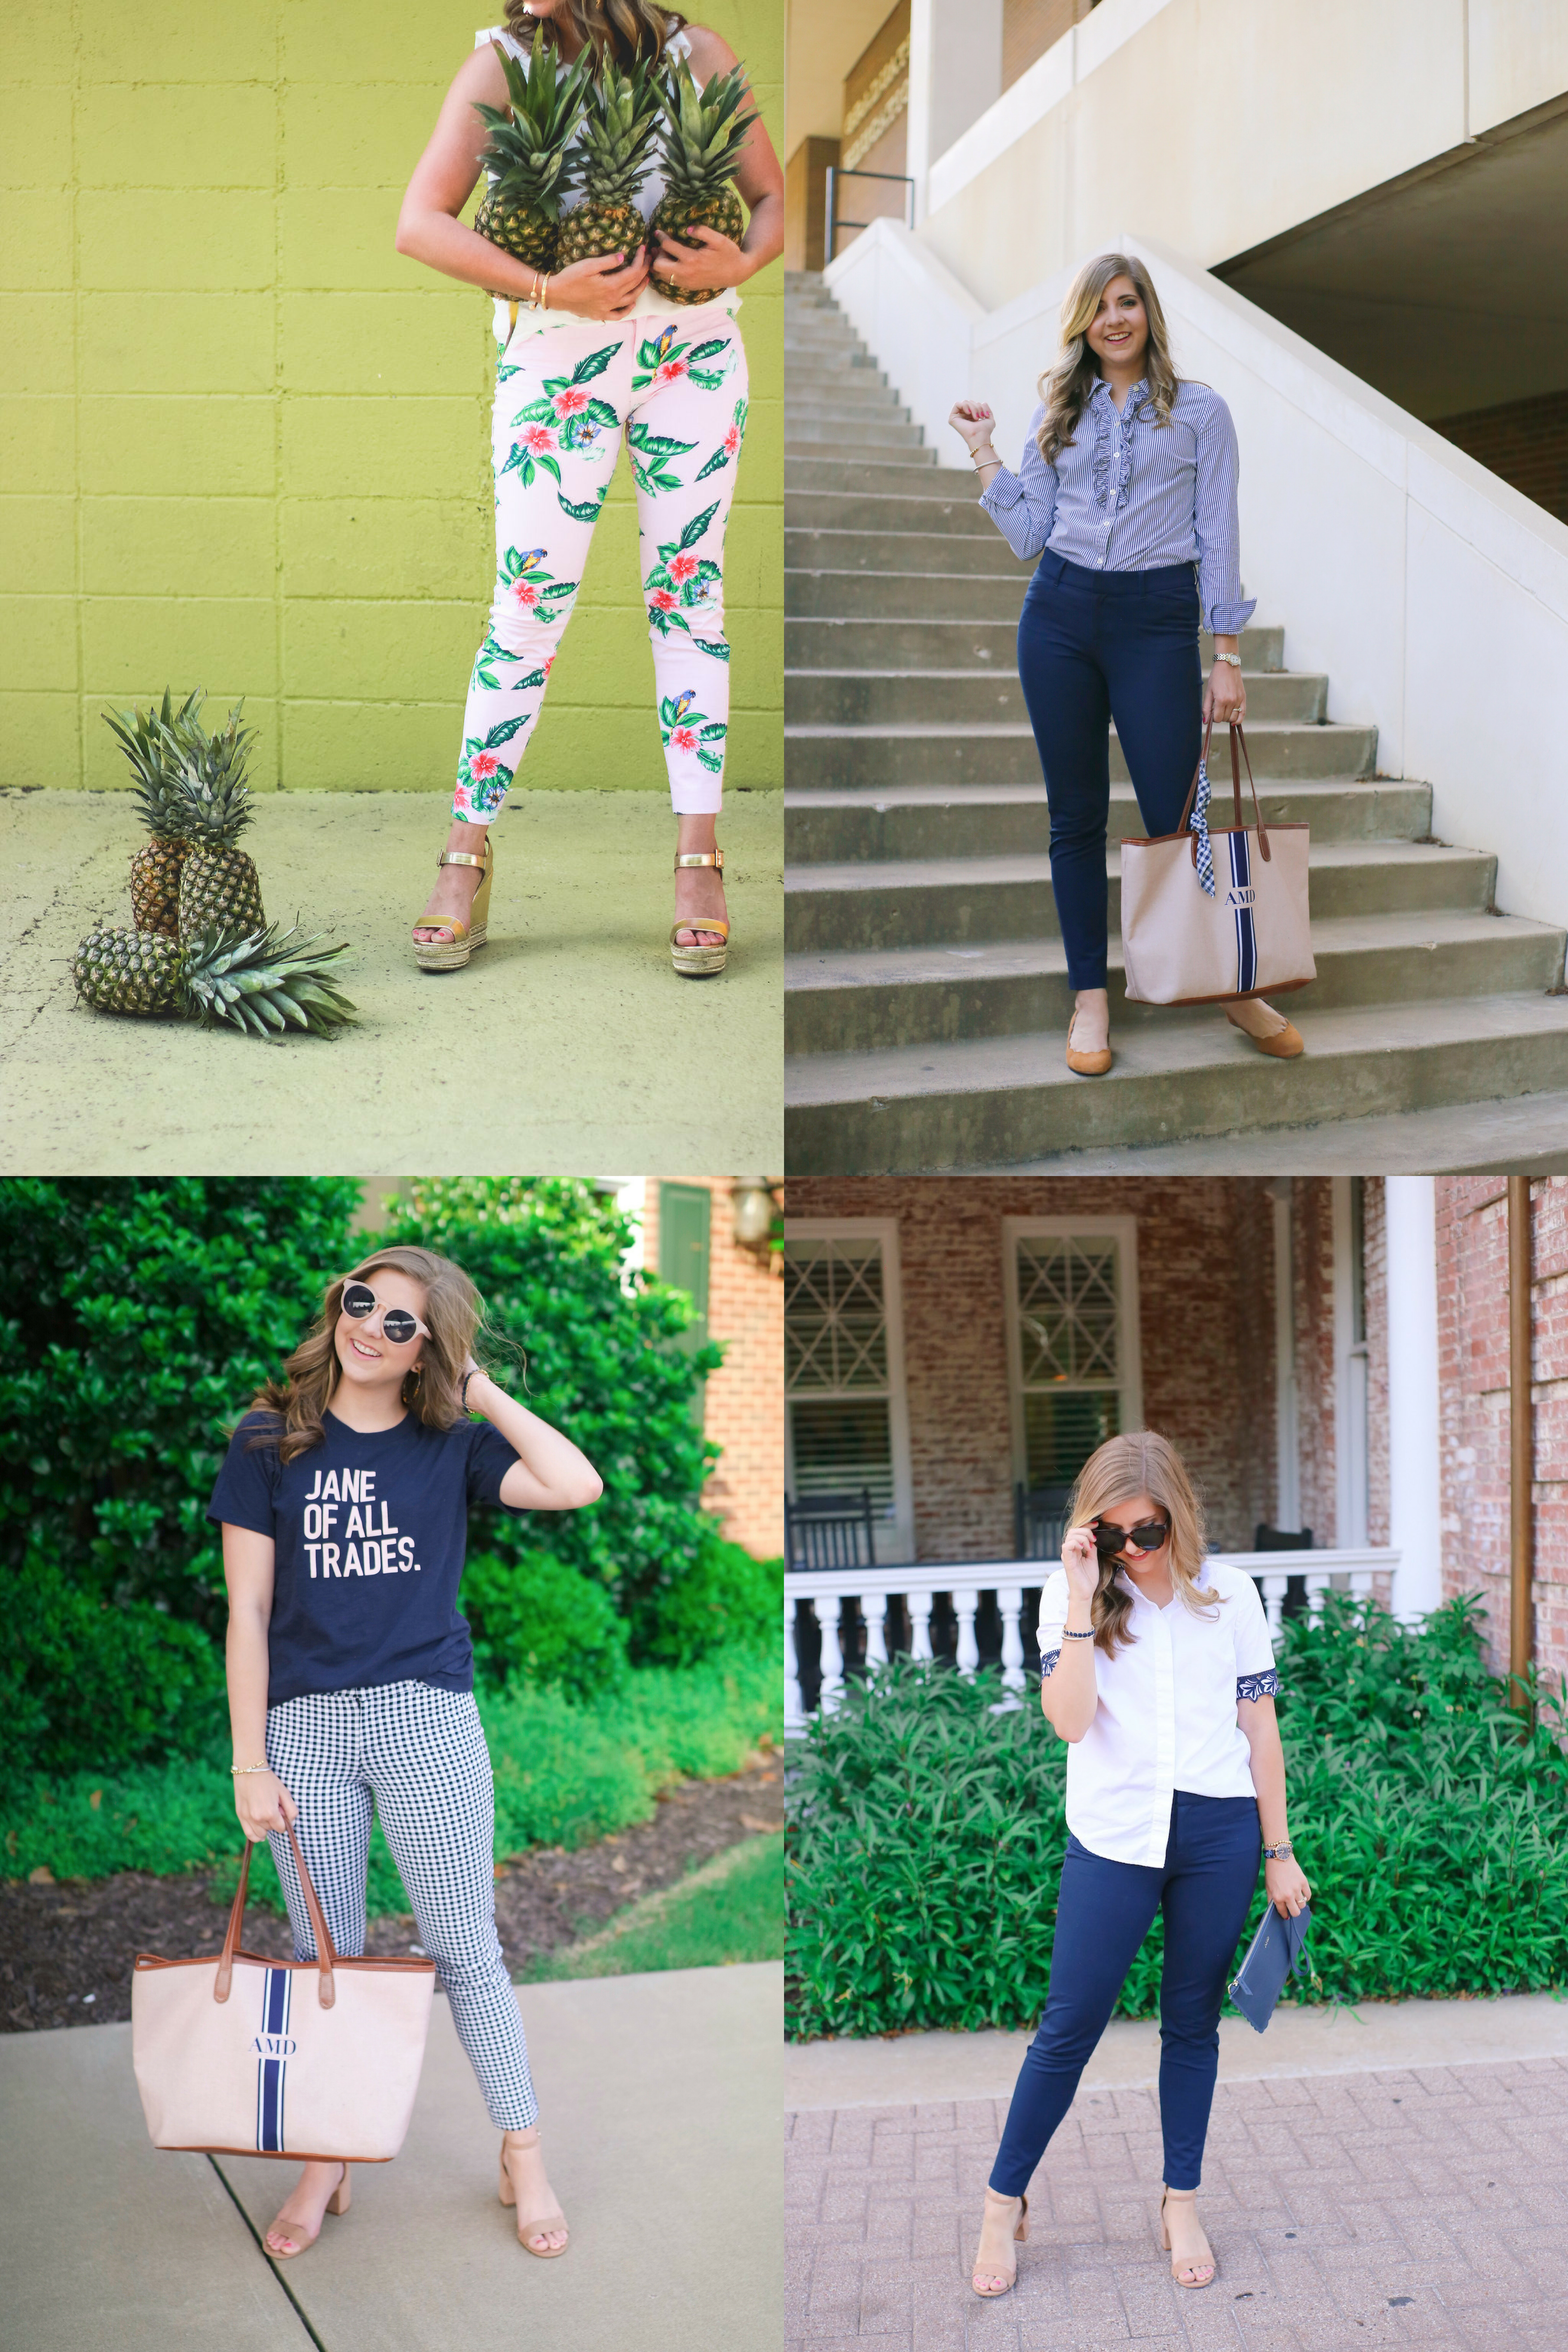 old navy jean style guide